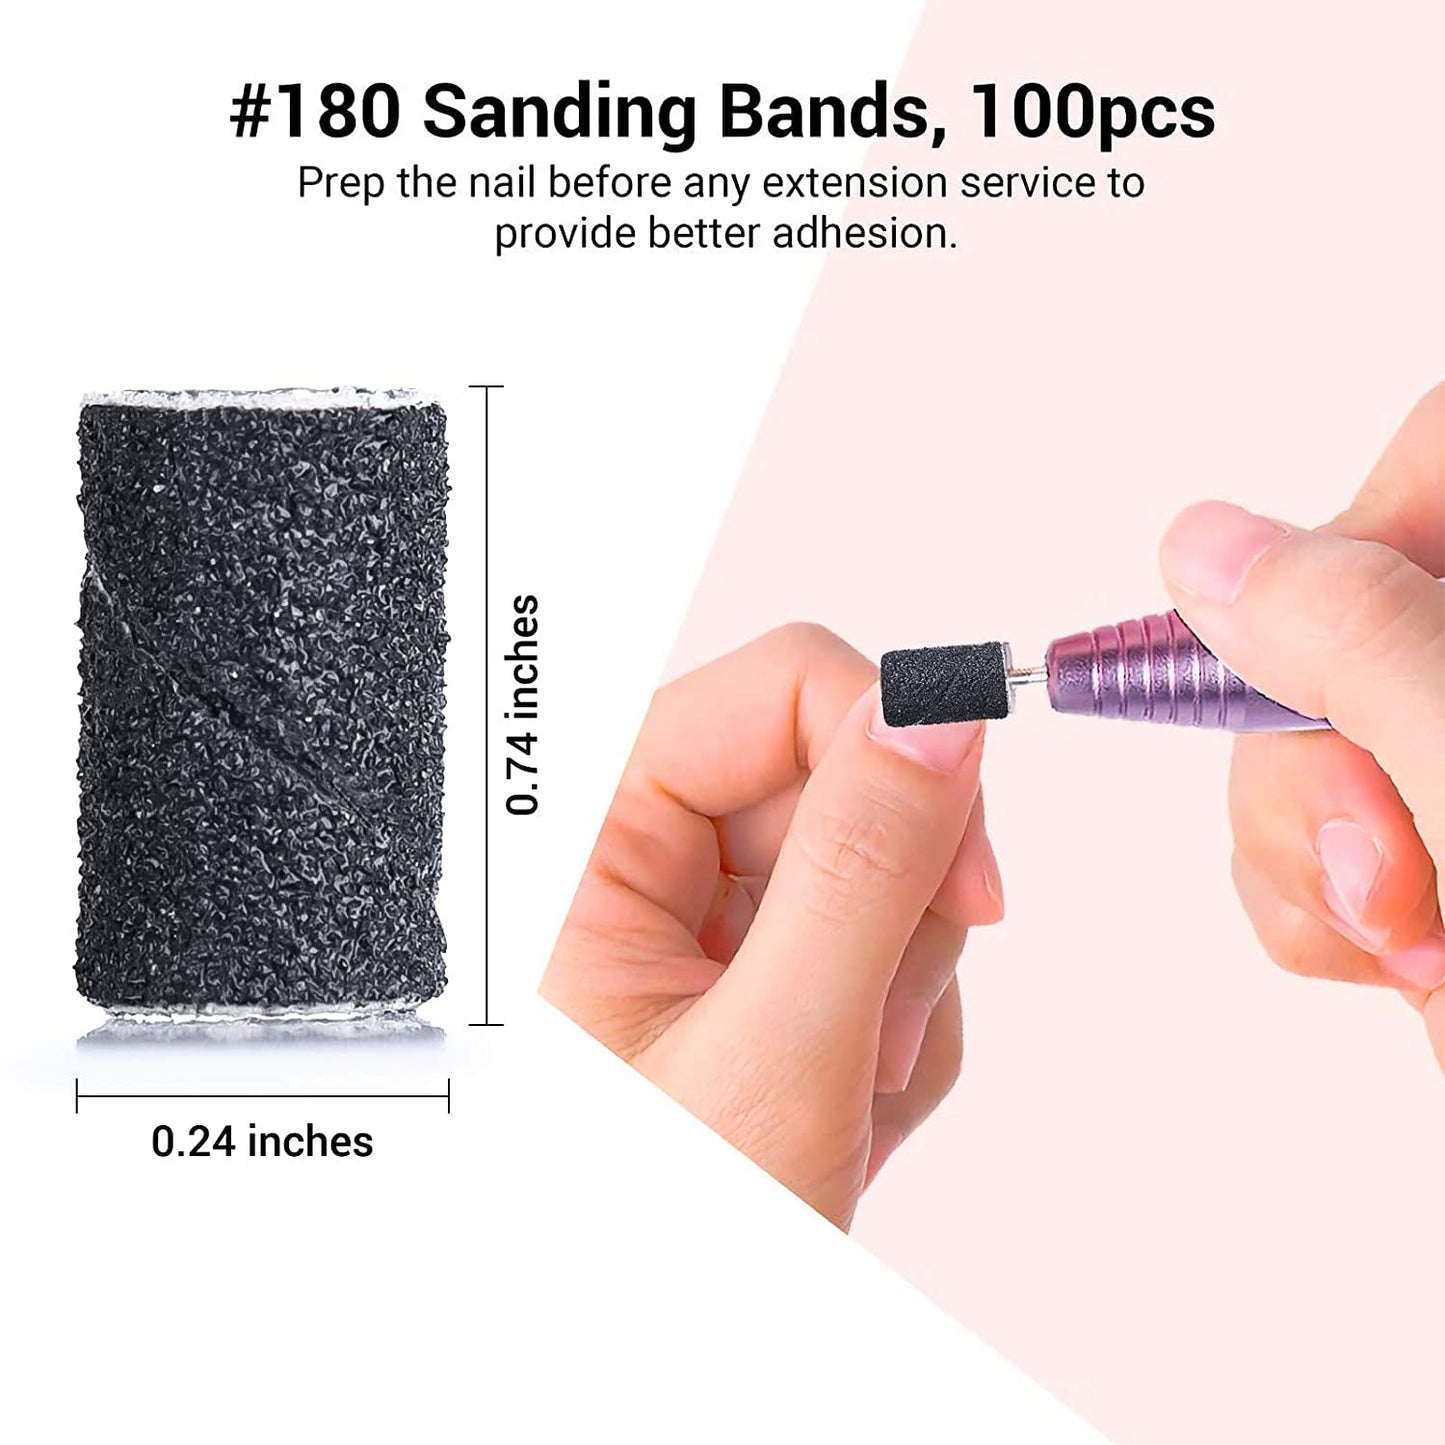 MelodySusie 300 Pcs Professional Sanding Bands with Mandrel for Nail Drill, 80 Coarse, 120 Medium, 180 Fine Grit EFile Sand Piece Nail Drill Bits Set for Acrylic Nails Manicures and Pedicures